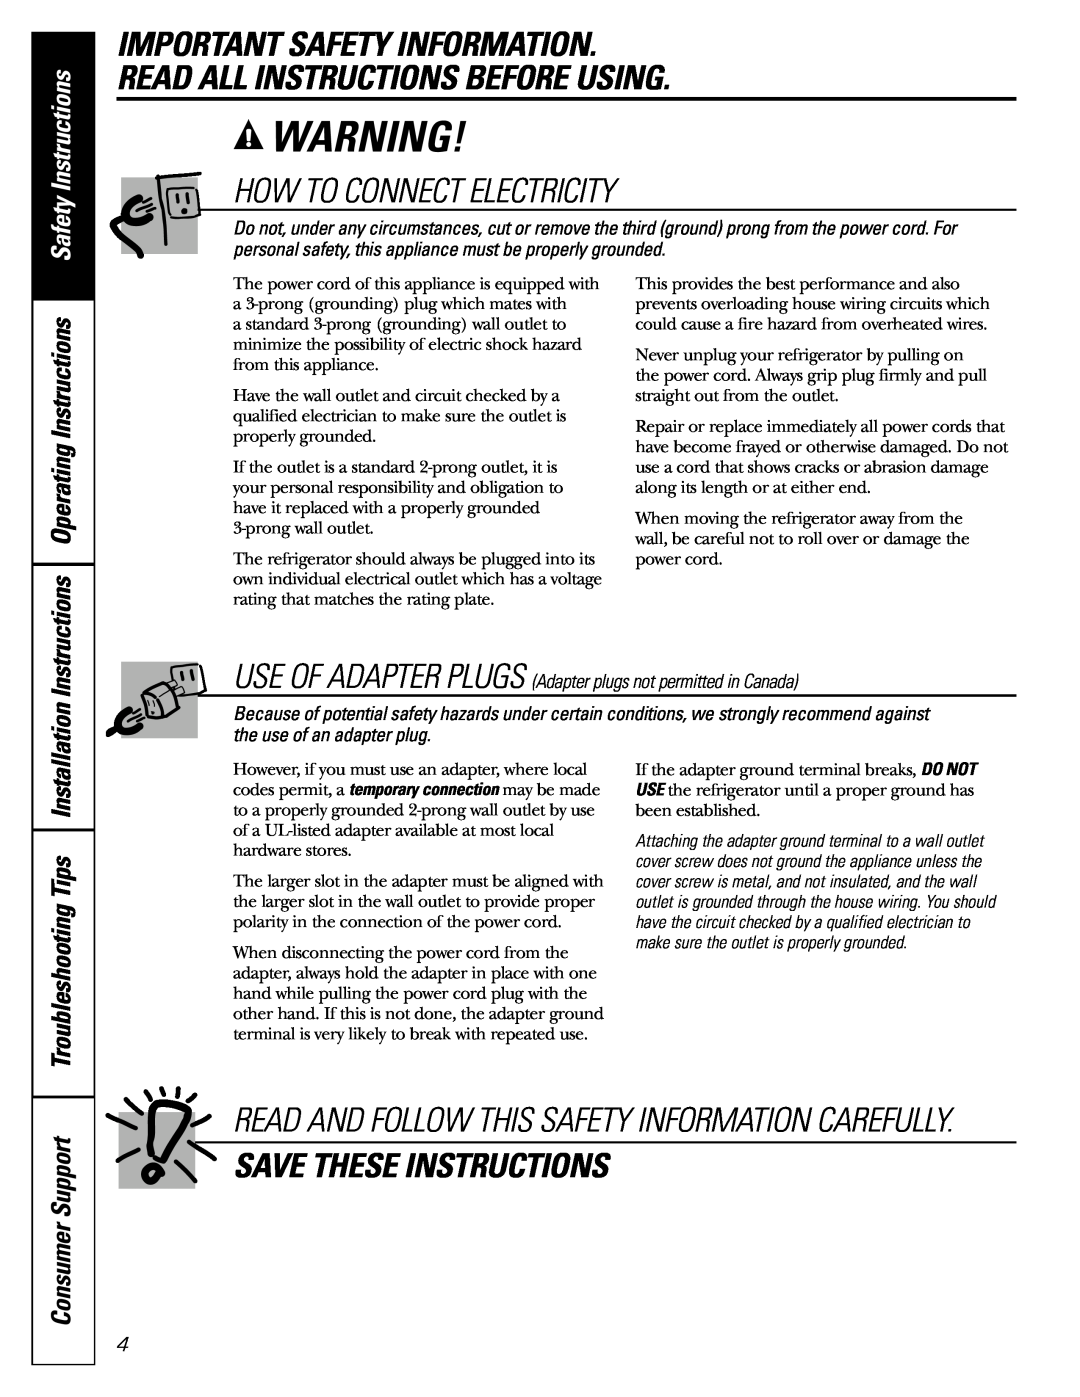 GE 200D26000P022 How To Connect Electricity, Save These Instructions, Troubleshooting Tips, Consumer Support 